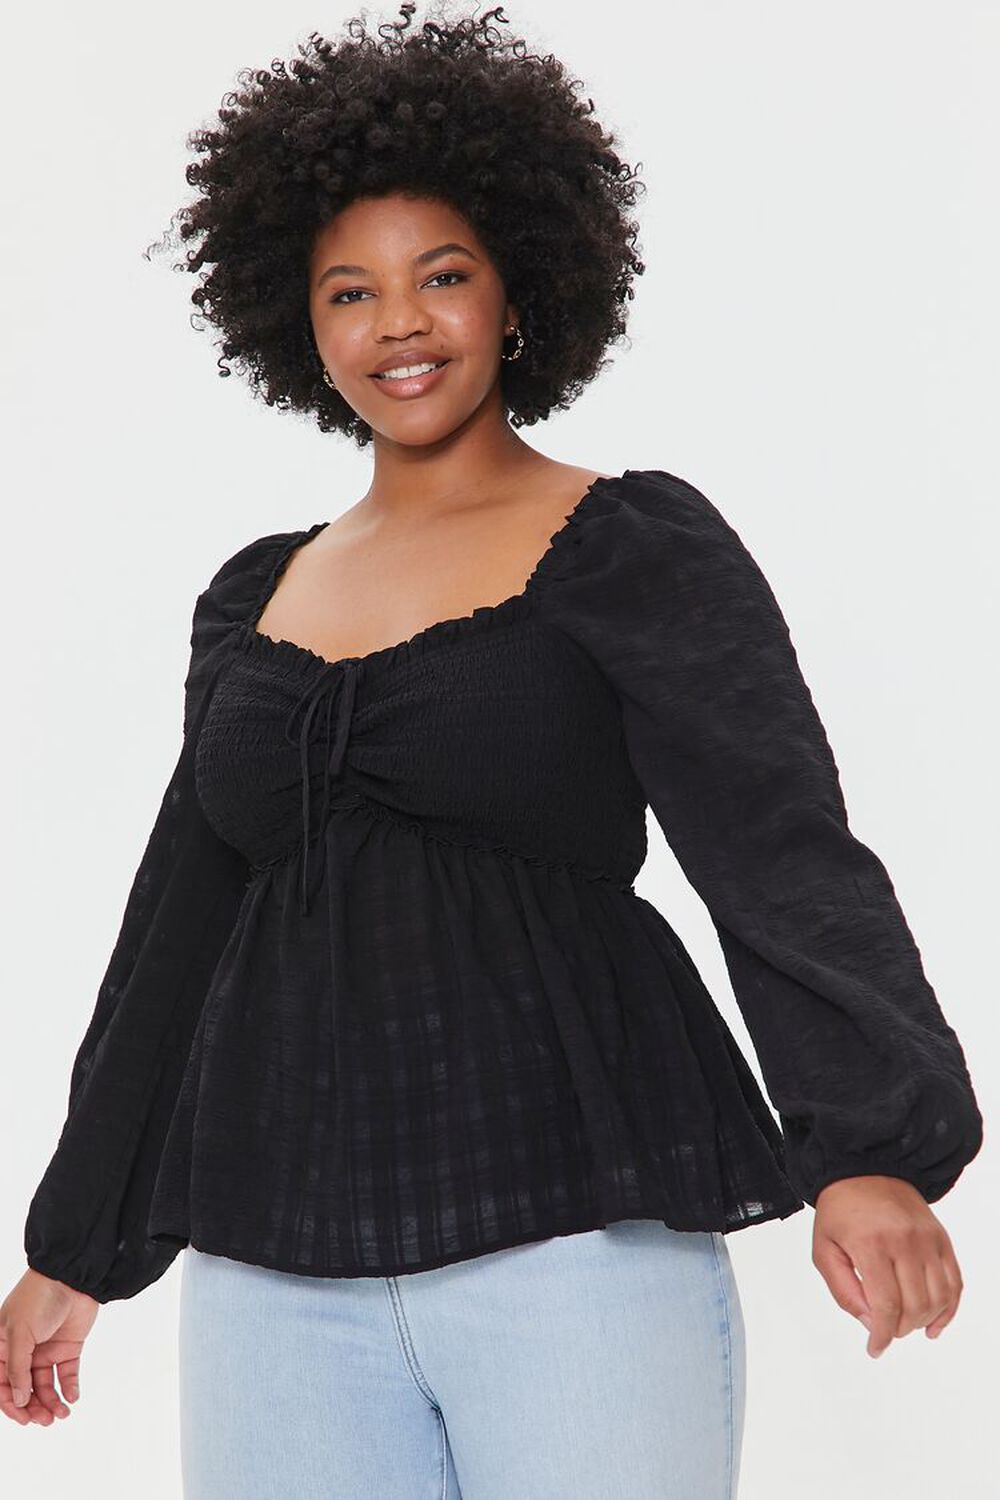 BLACK Plus Size Sweetheart Gingham Top, image 1